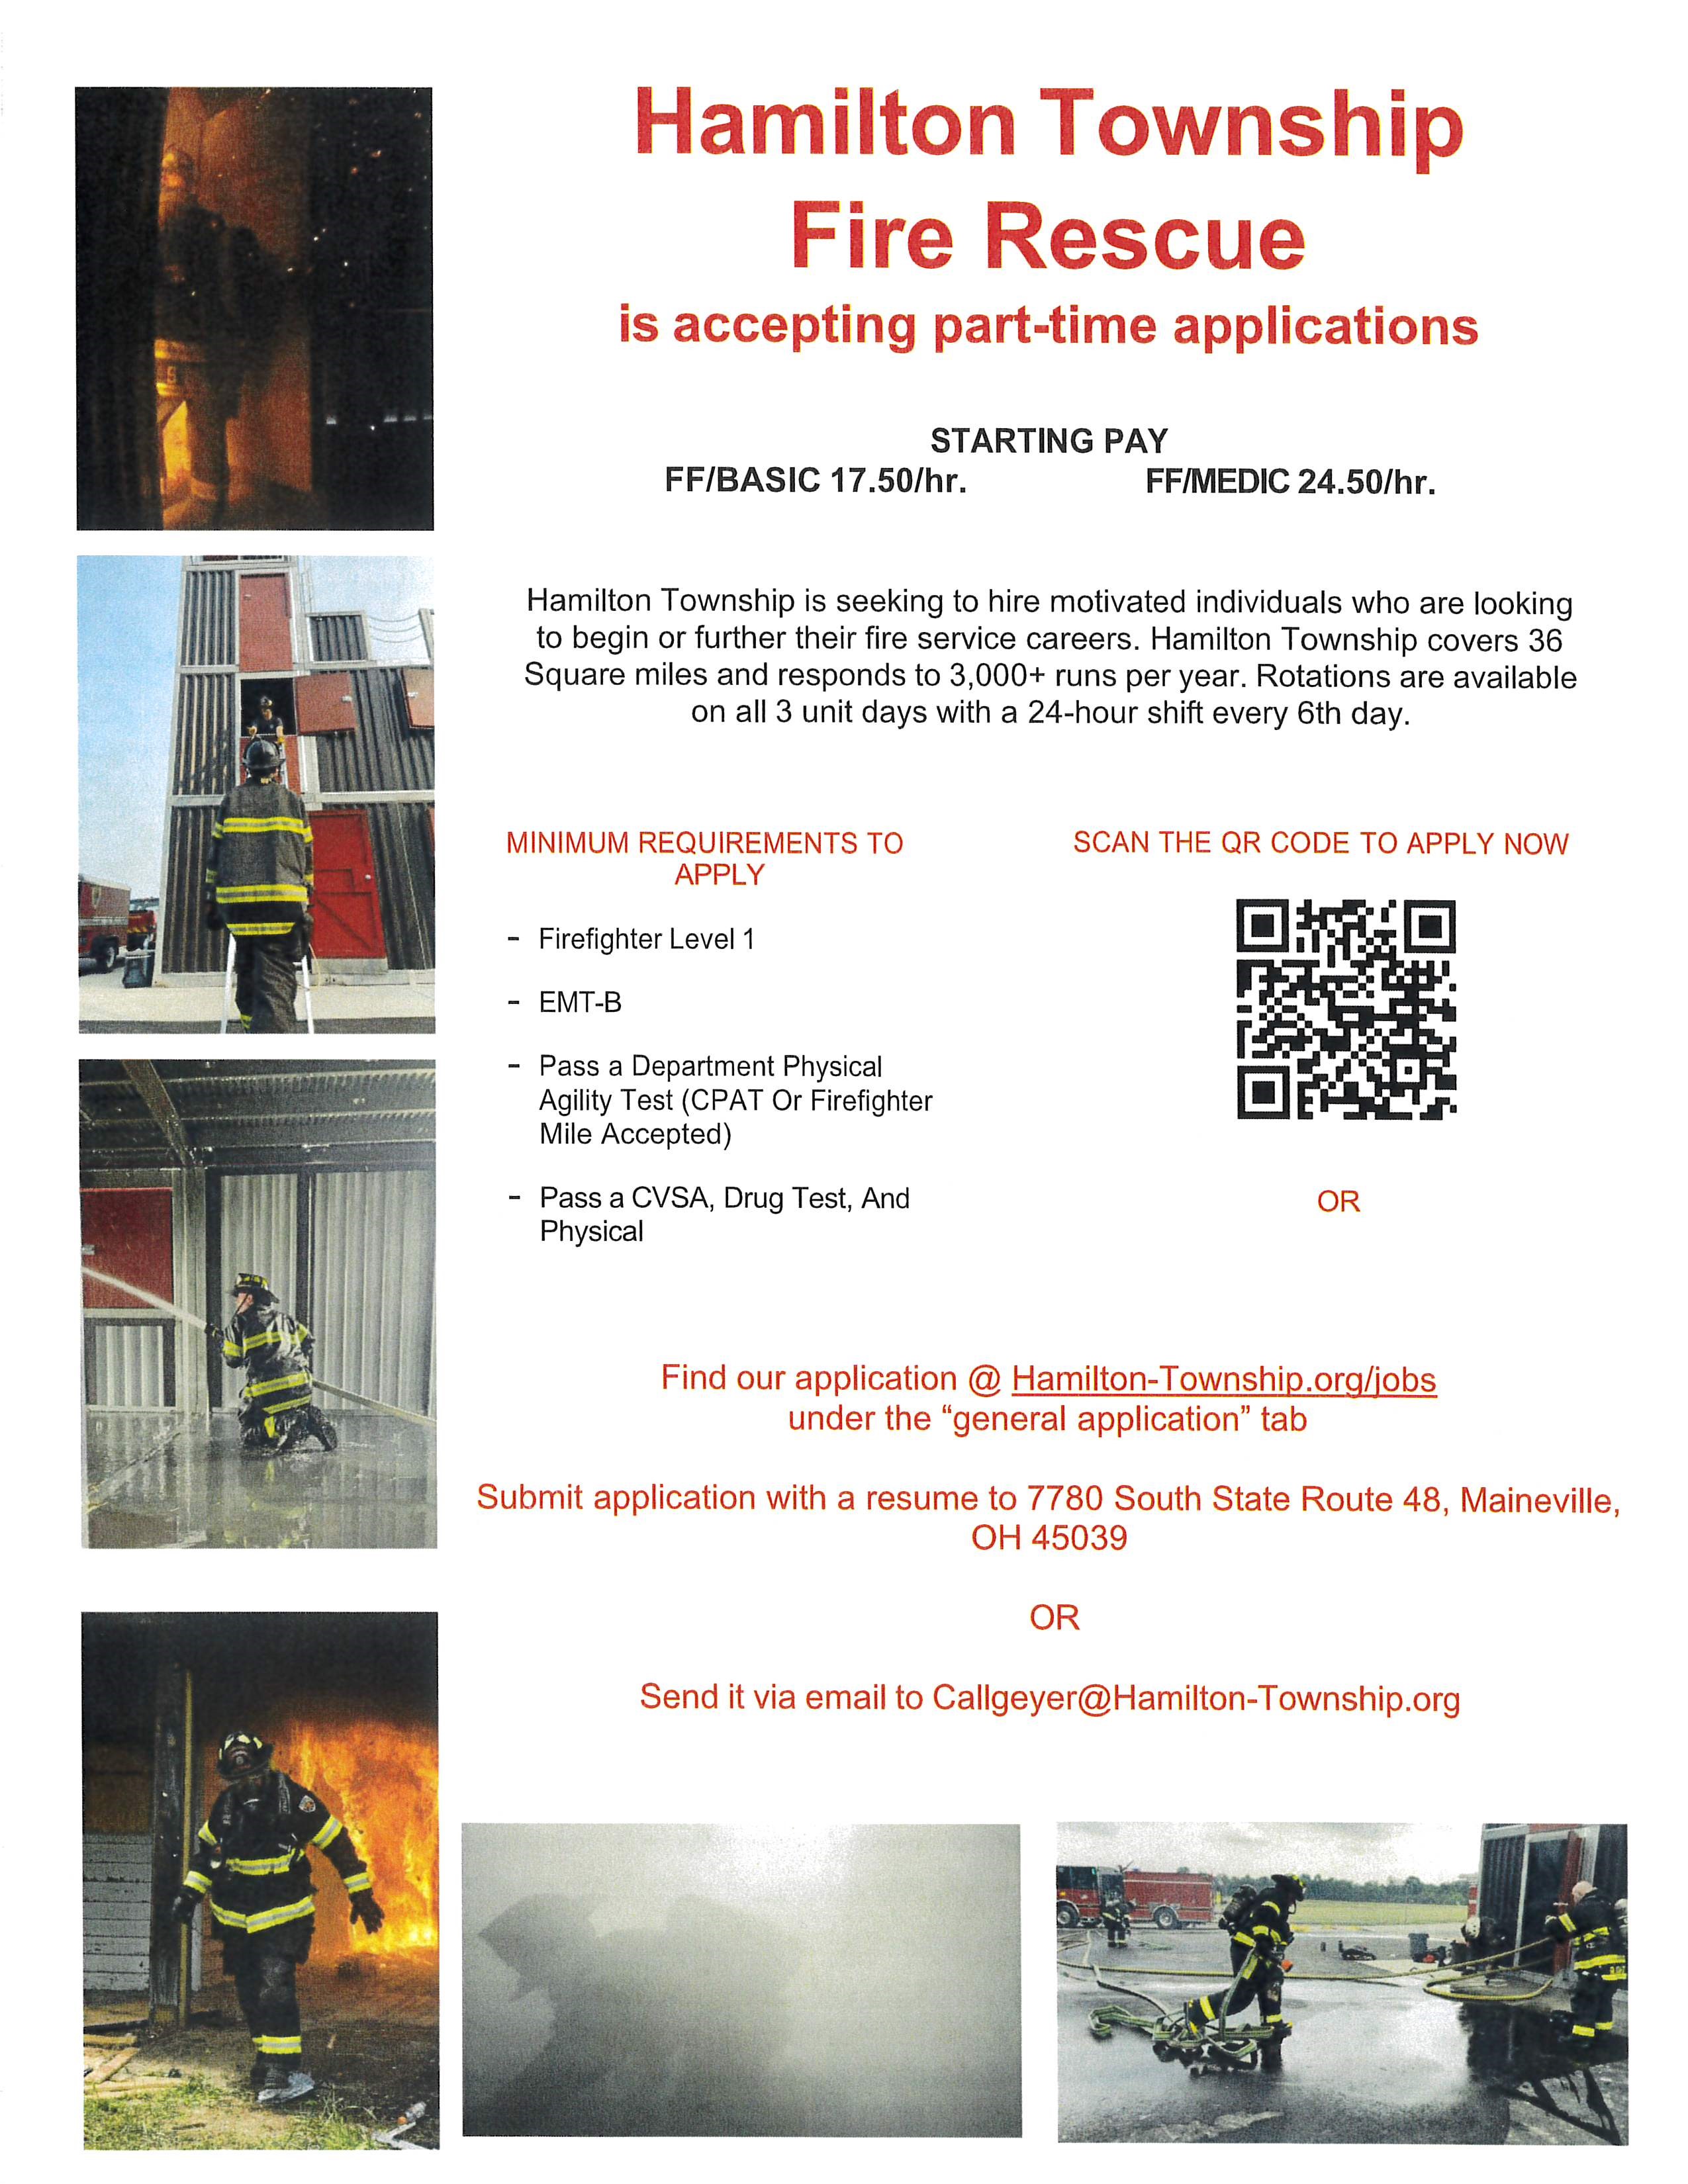 Download a PDF Version of the Hamilton Township Fire Rescue Part Time Applications Flyer through this hyperlink https://www.hamilton-township.org/media/news/FT hire flyer-2023(1).pdf 